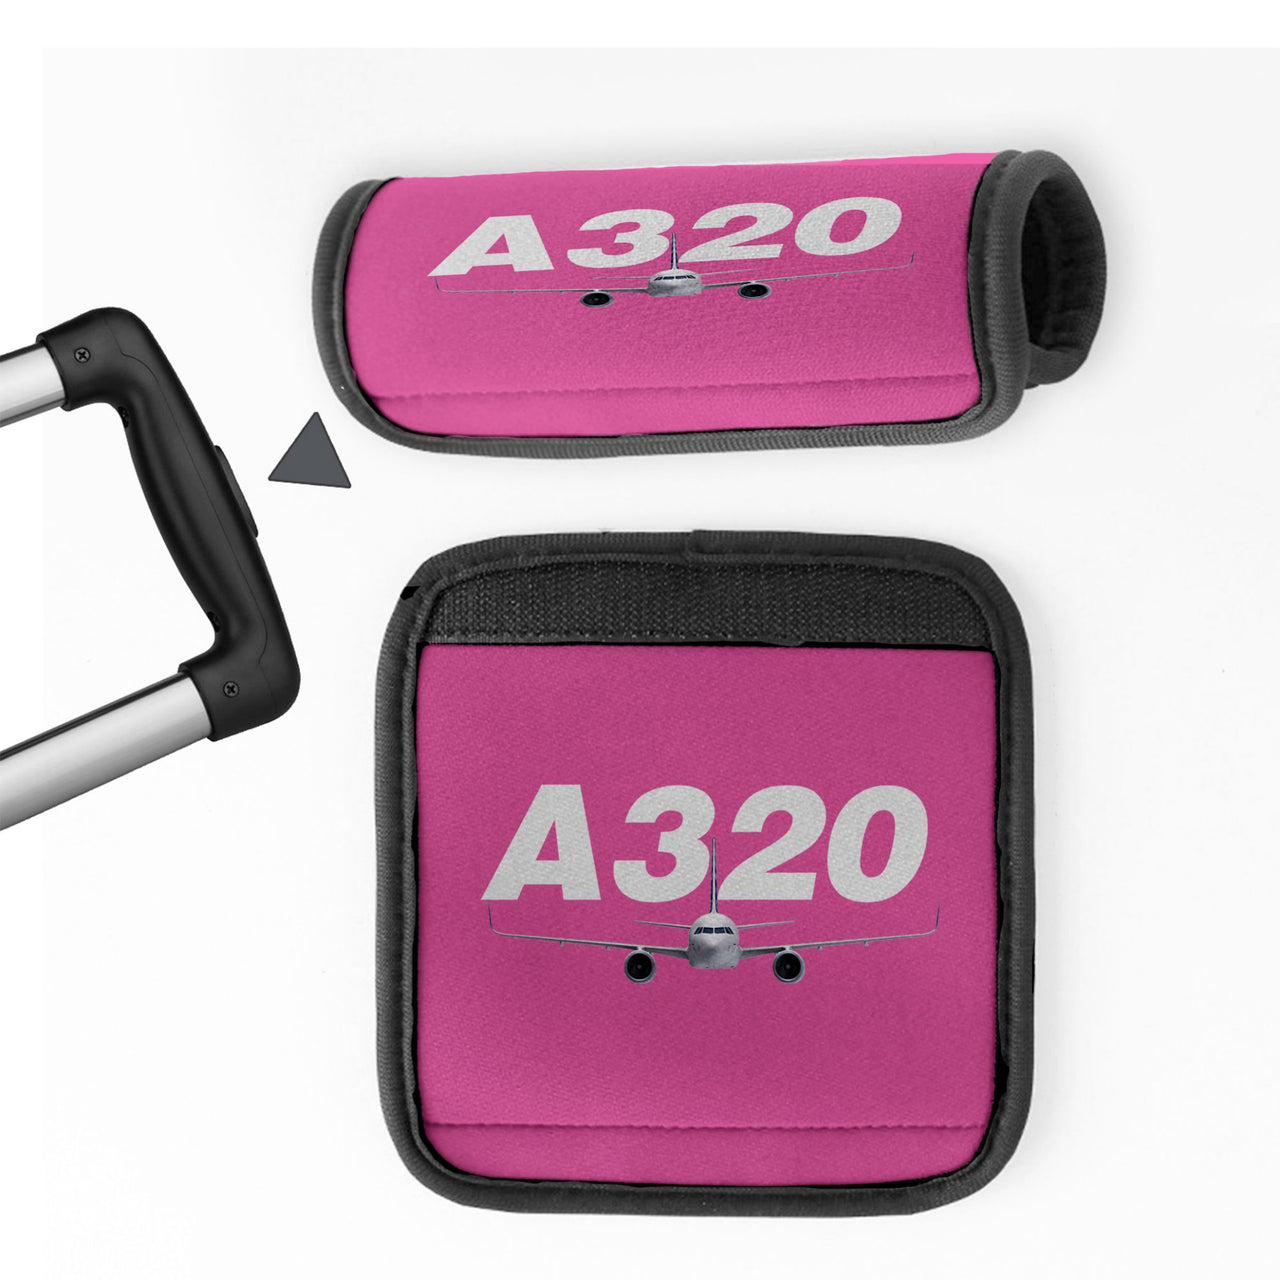 Super Airbus A320 Designed Neoprene Luggage Handle Covers